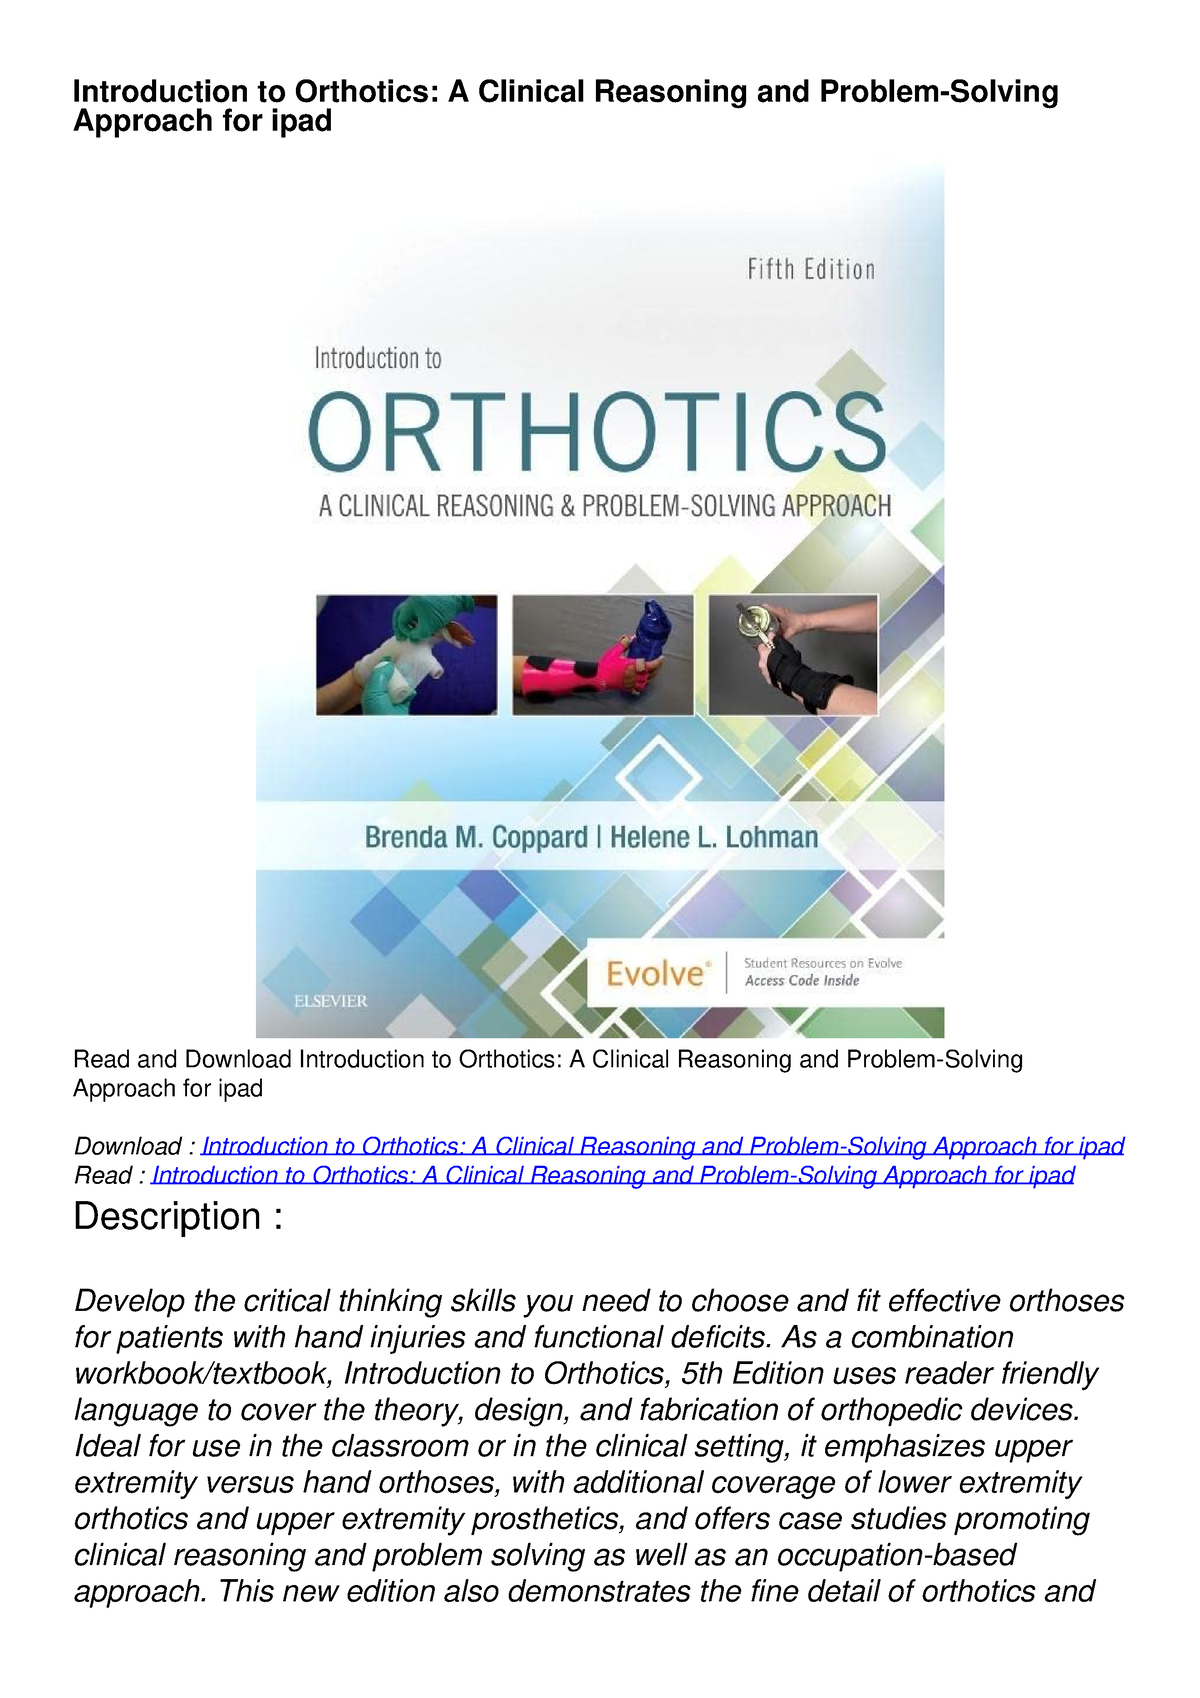 introduction to orthotics a clinical reasoning and problem solving approach